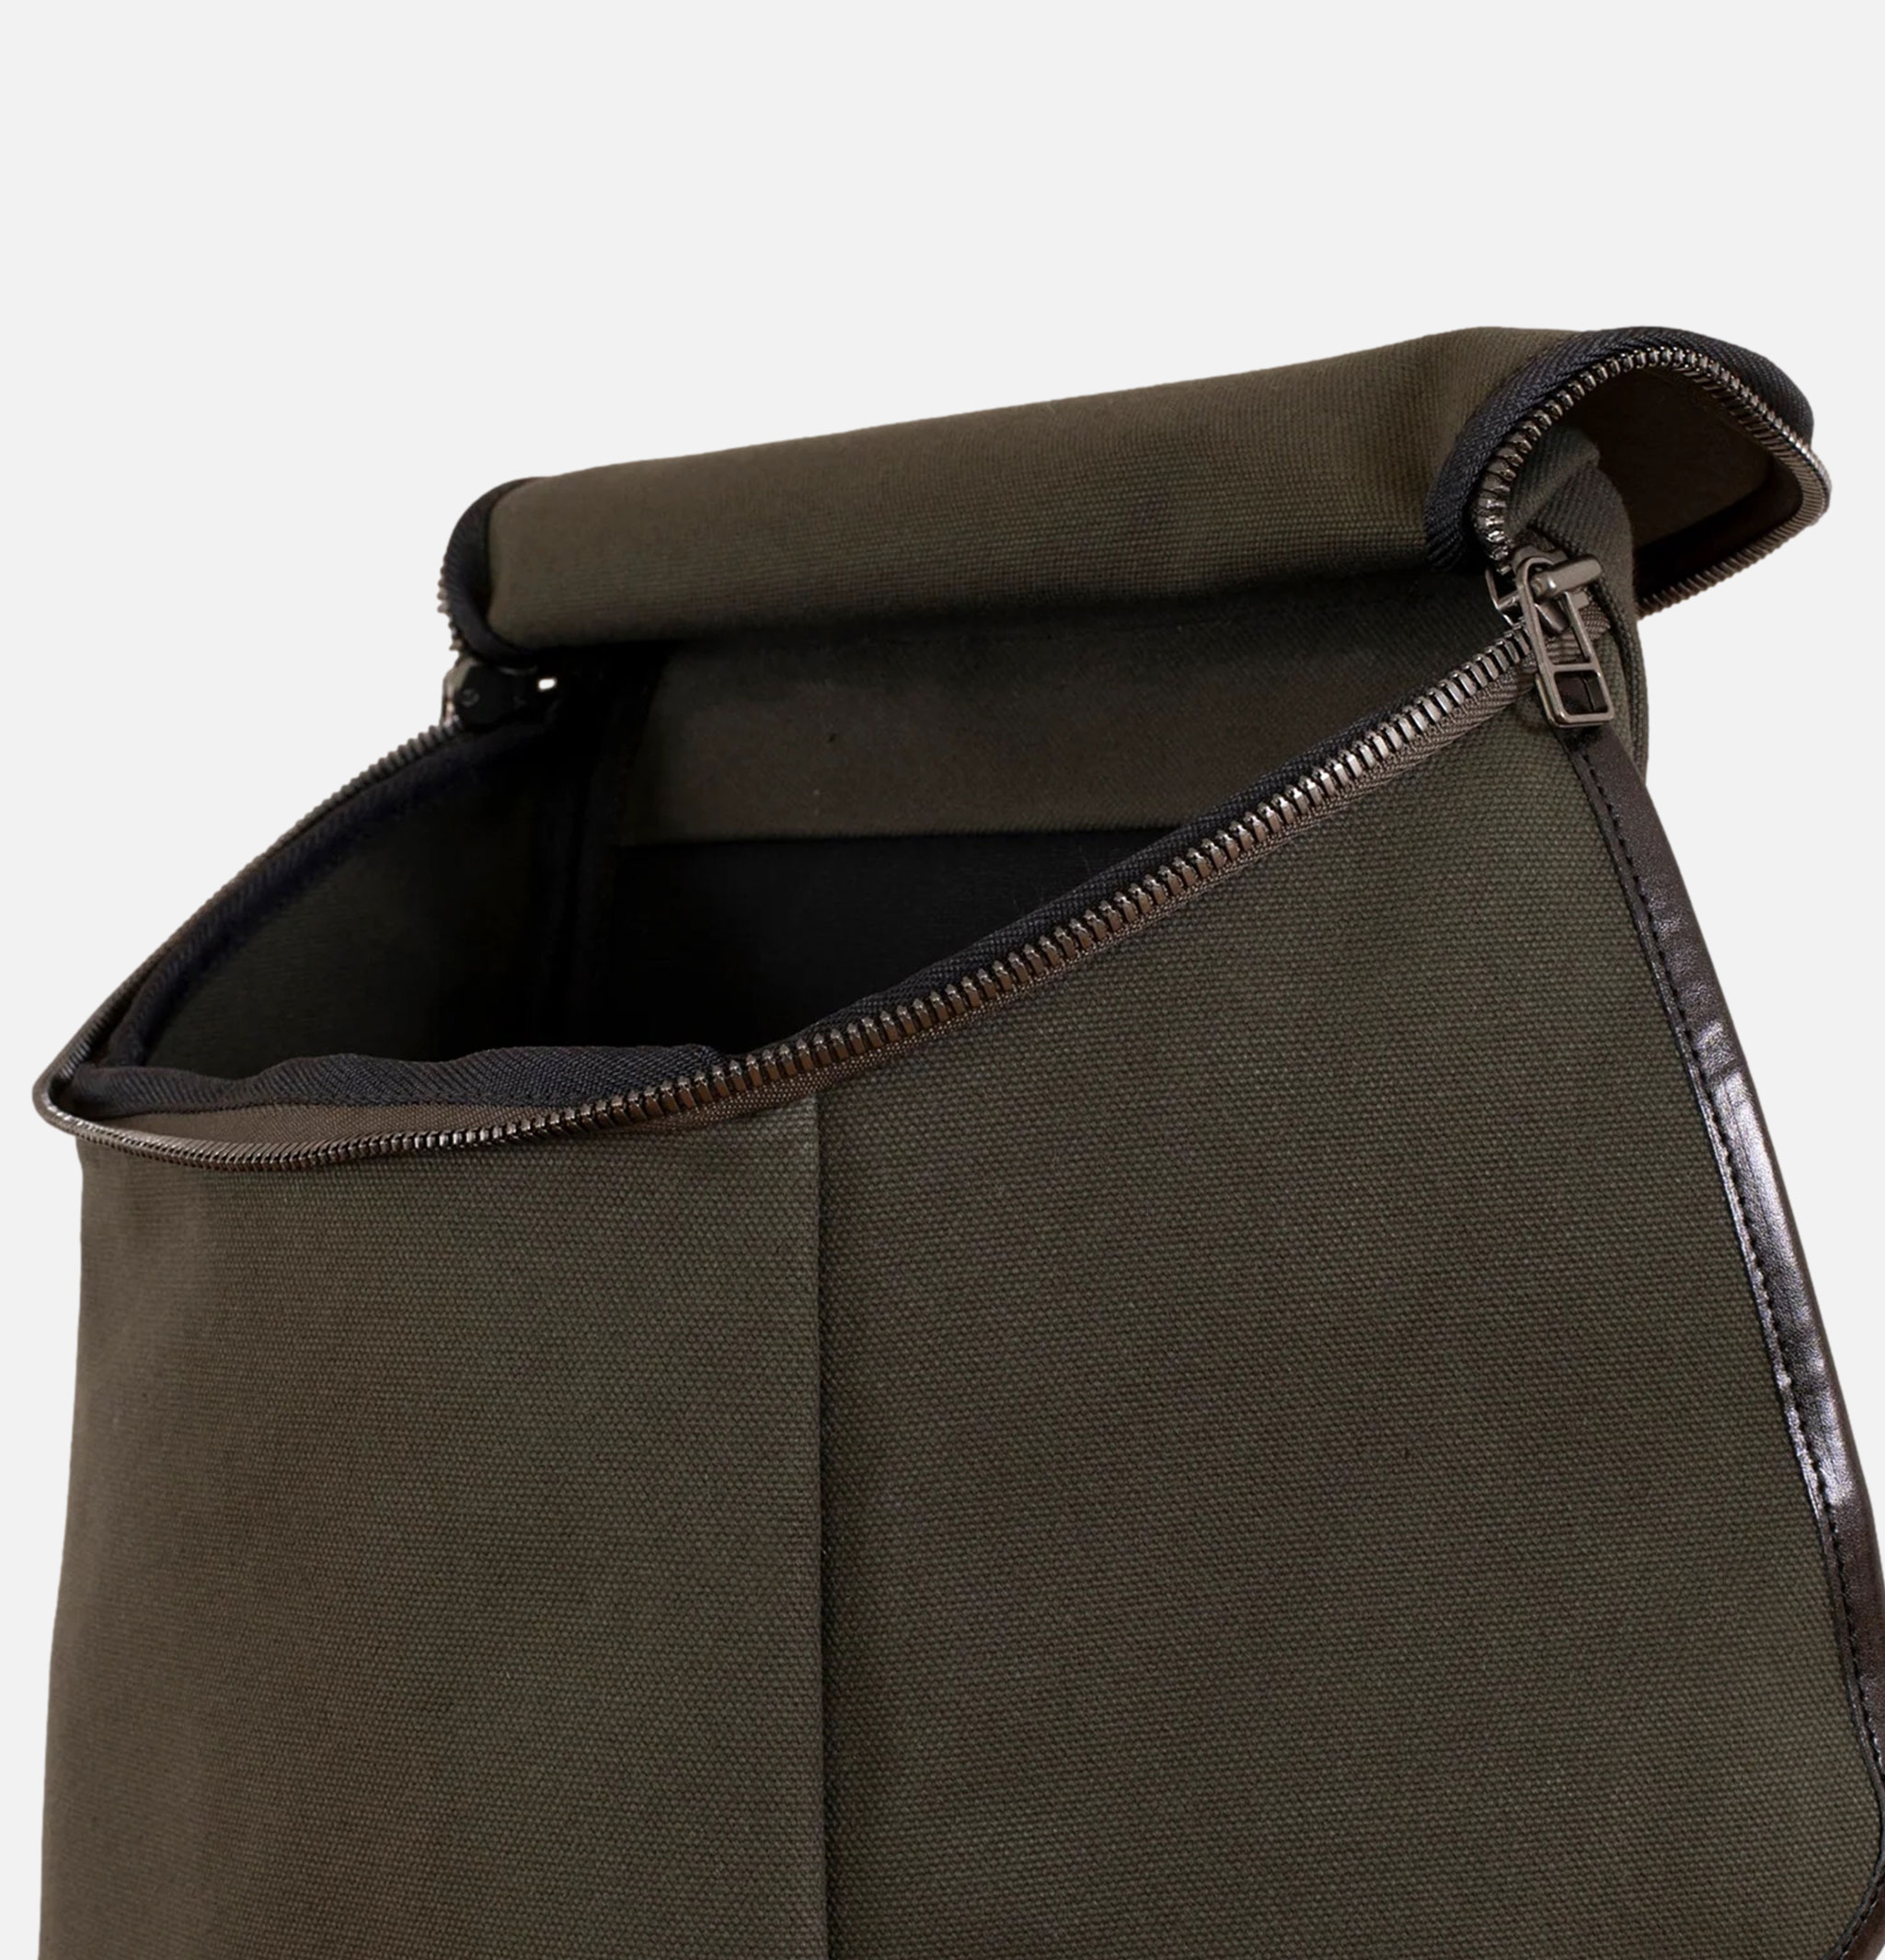 Southern Field Backpack Olive Green